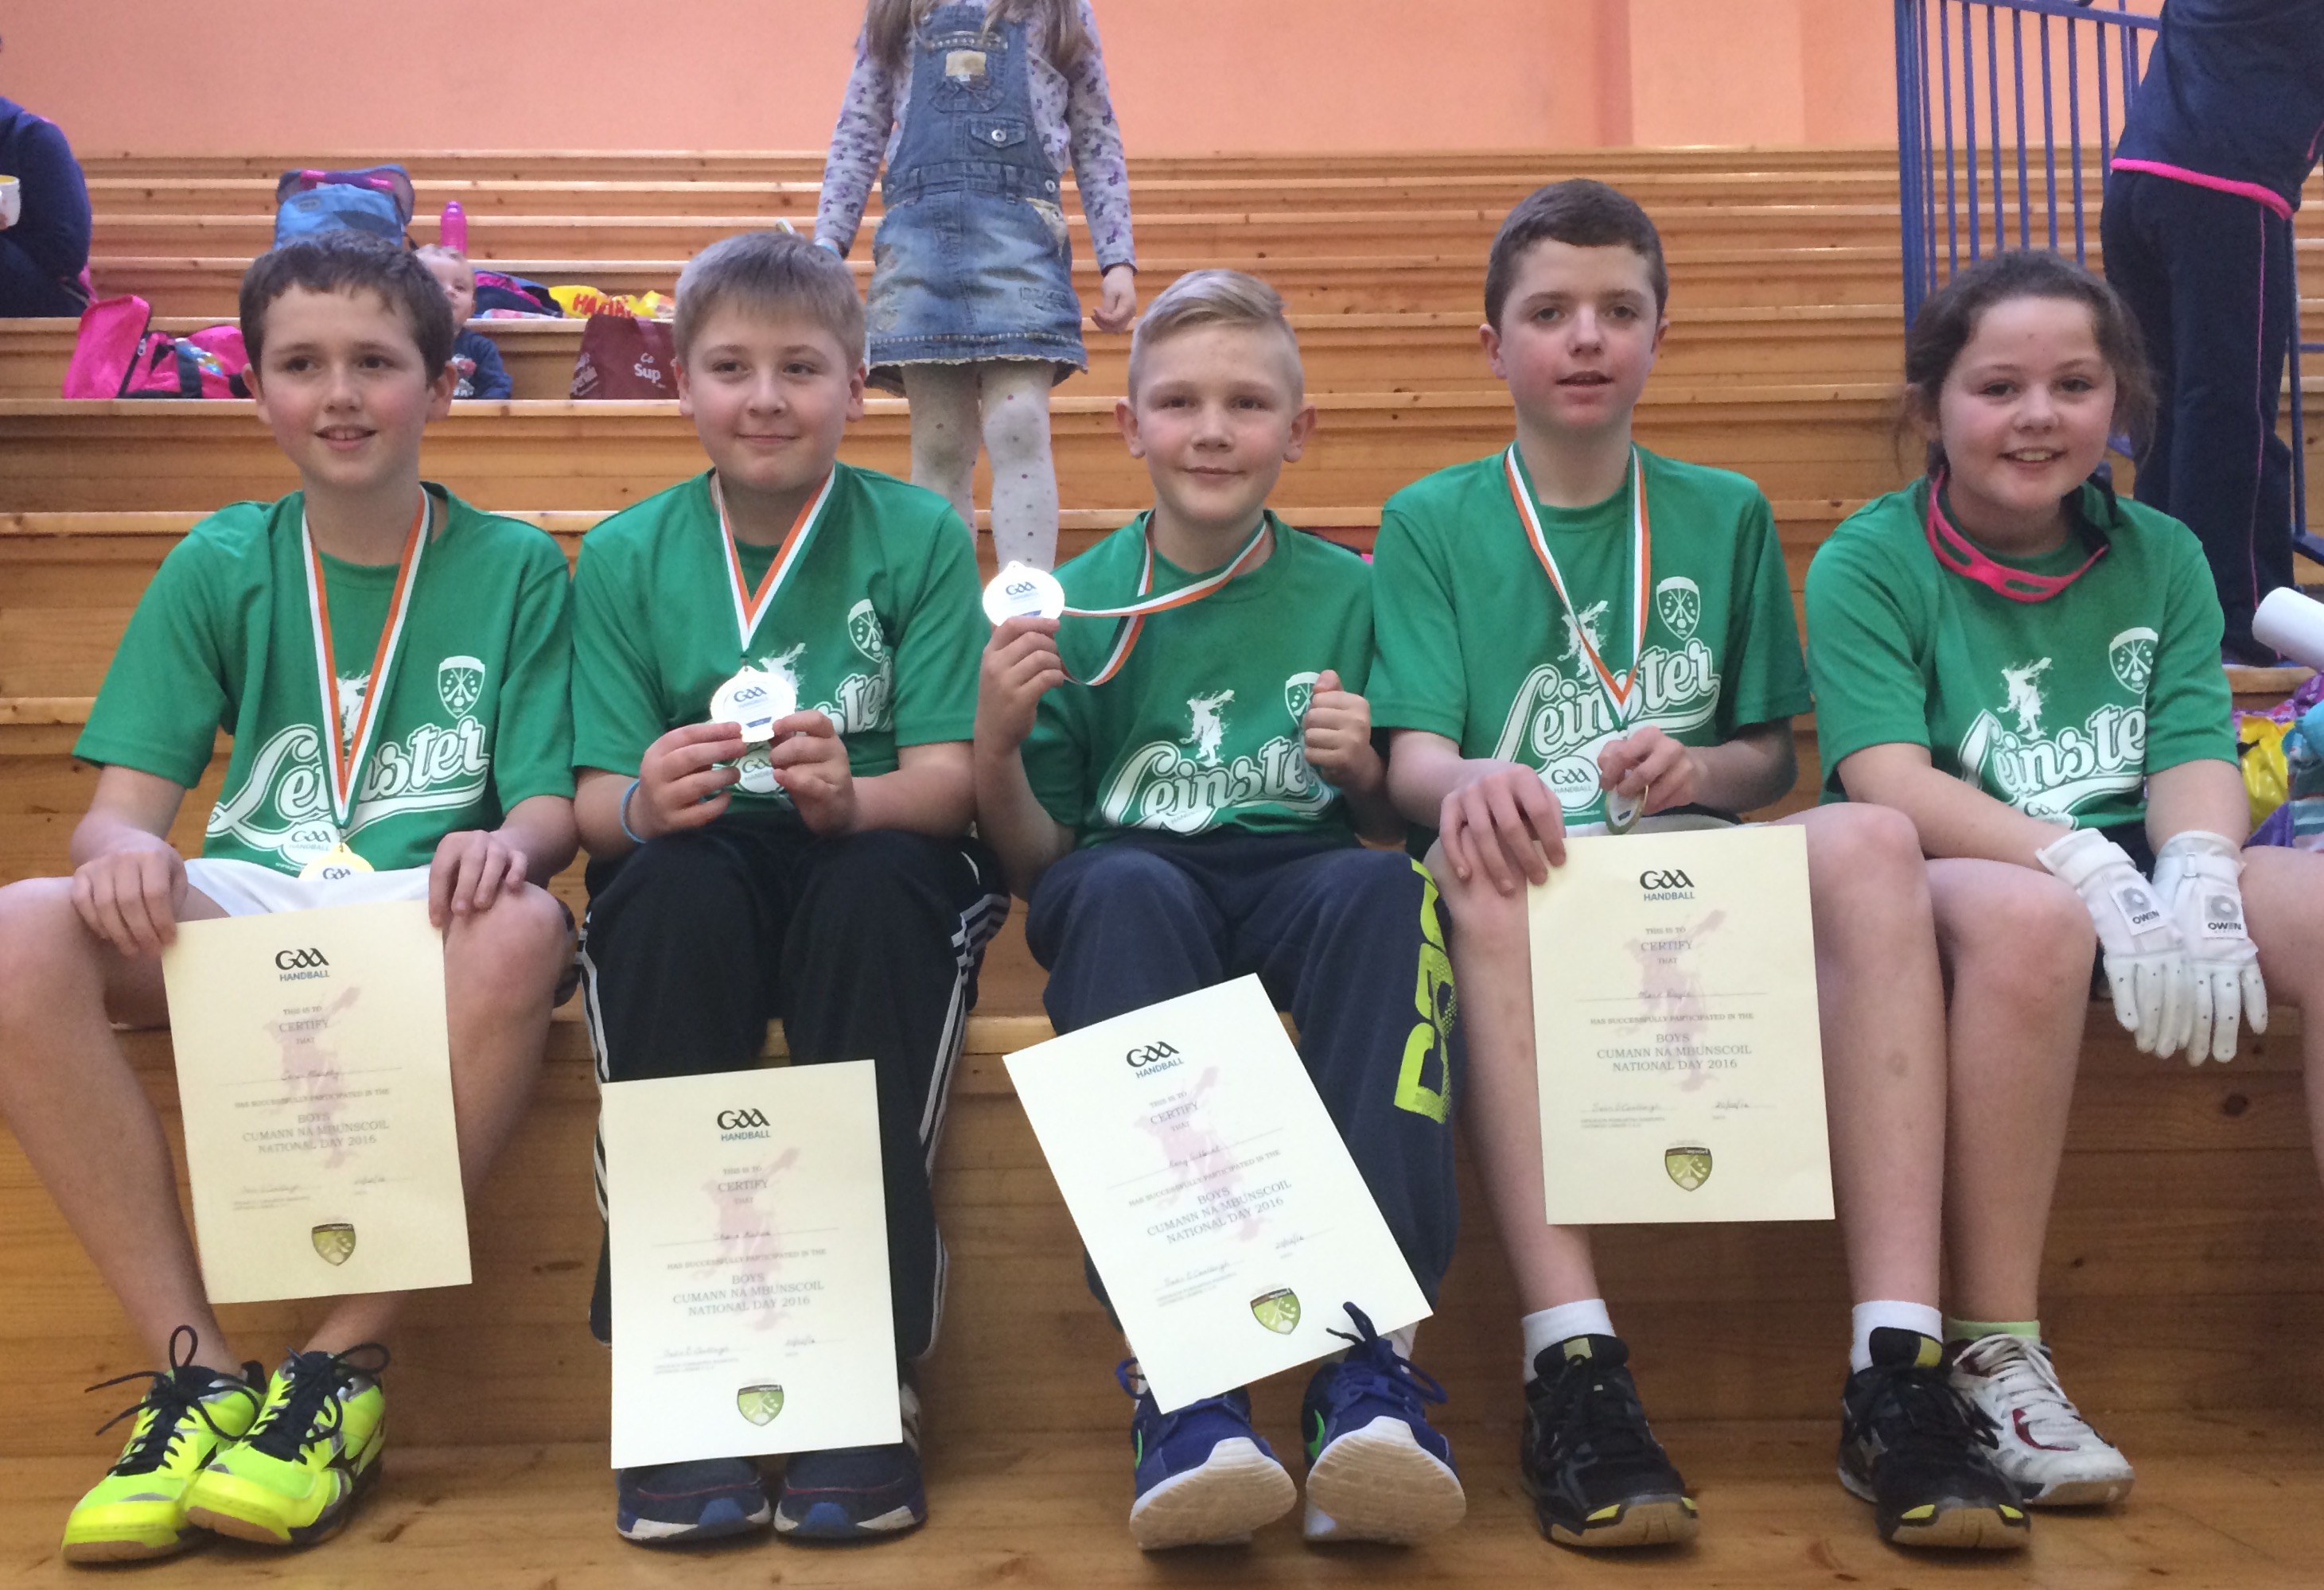 Wexford's county and Leinster Cumann na mBunscoil champions Rory Gilbert, Mark Doyle, Jody Keeling, Conor Murphy & Shane Kehoe were in sparking form at the national finals at Kingscourt on Saturday last.